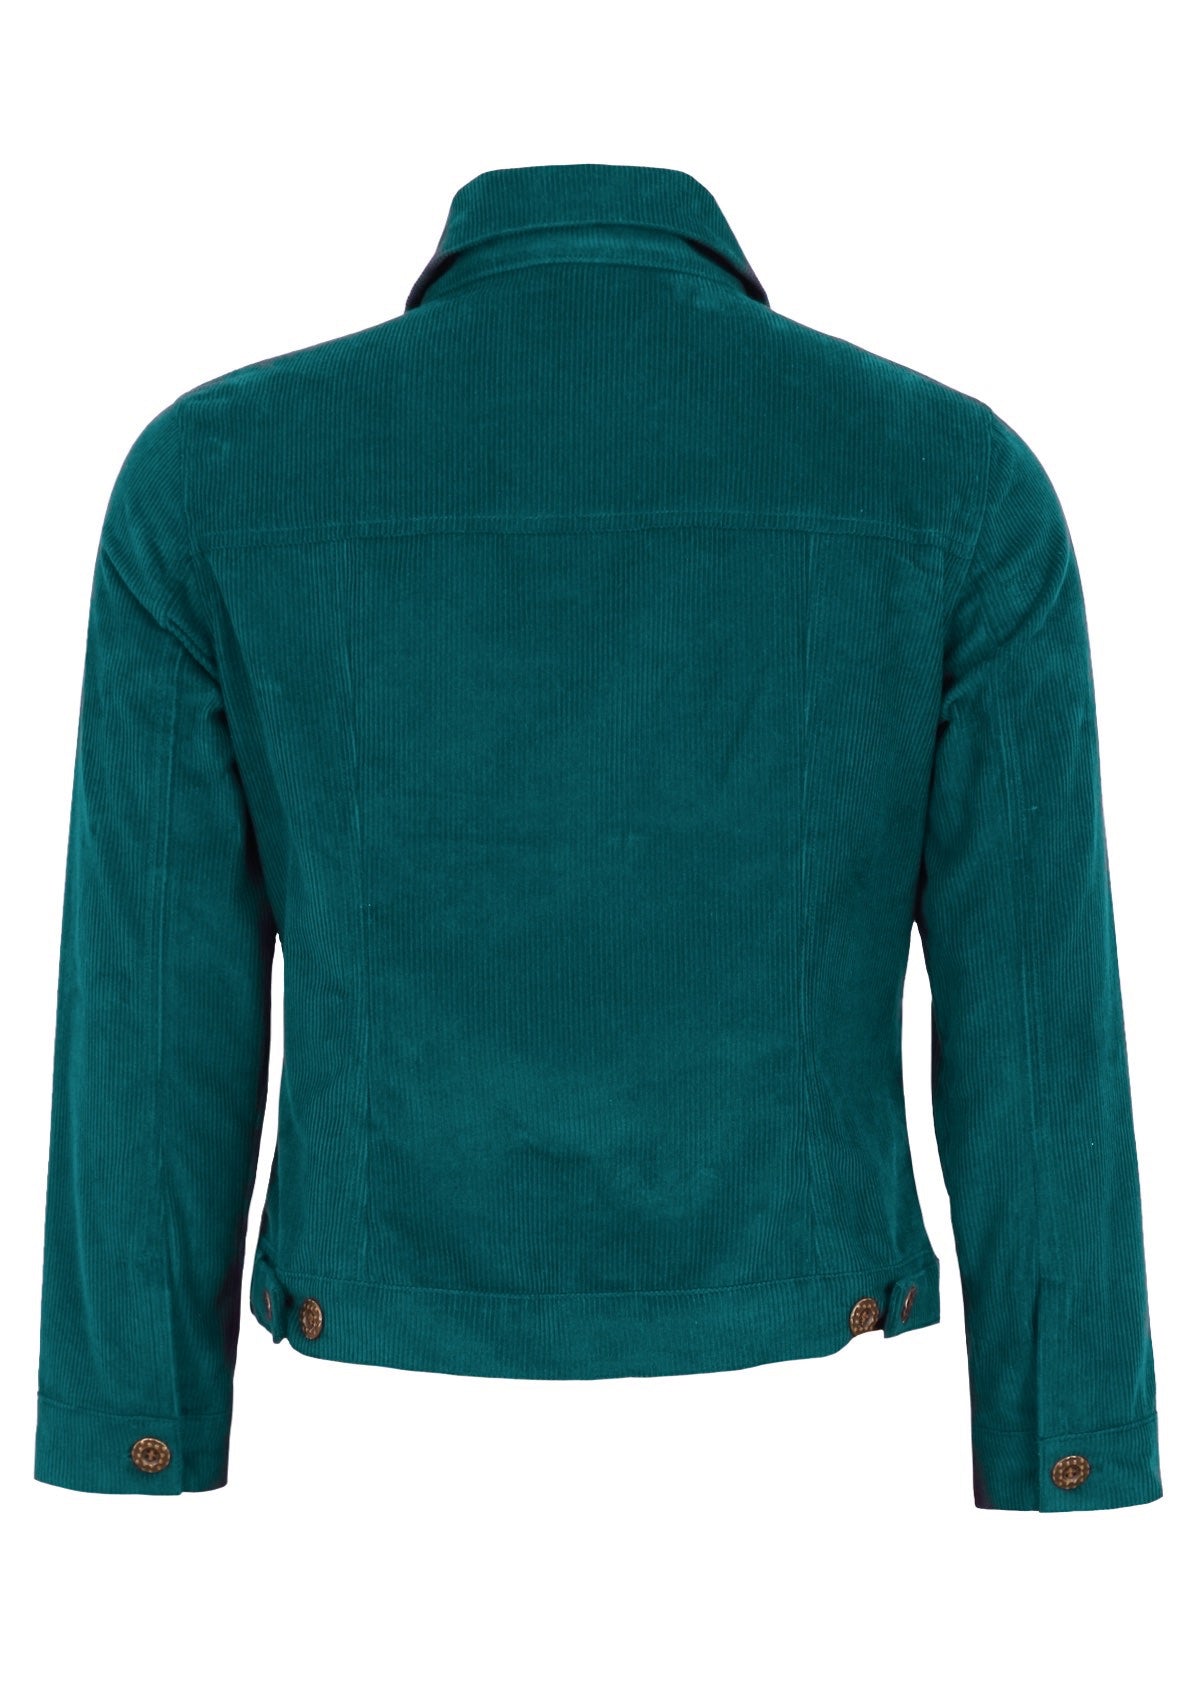 100% cotton corduroy jacket has adjustable tabs for the perfect fit!